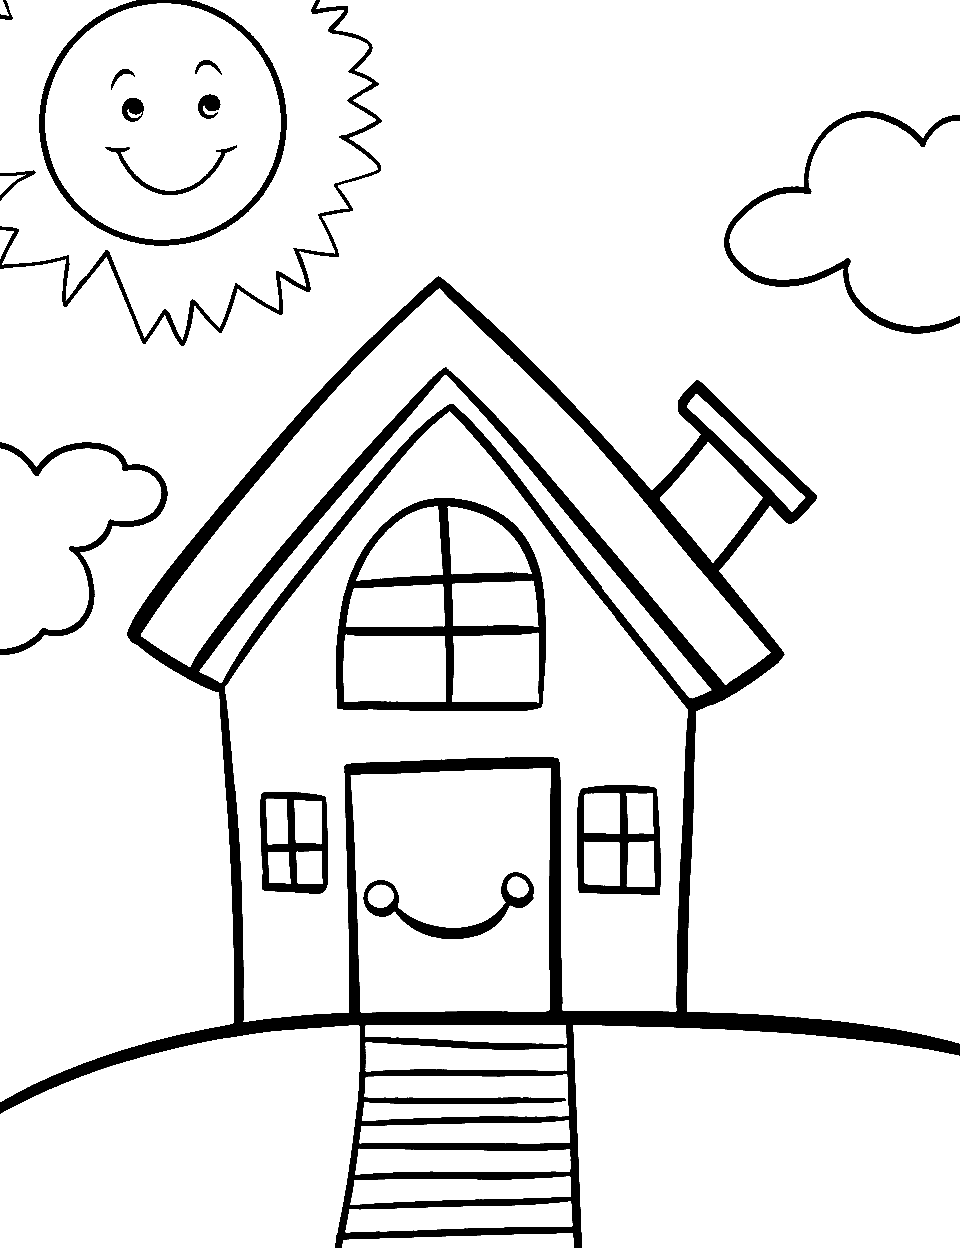 Peaceful Easy Design Coloring Page - A basic, easy-to-color house with a smiling sun in the sky.